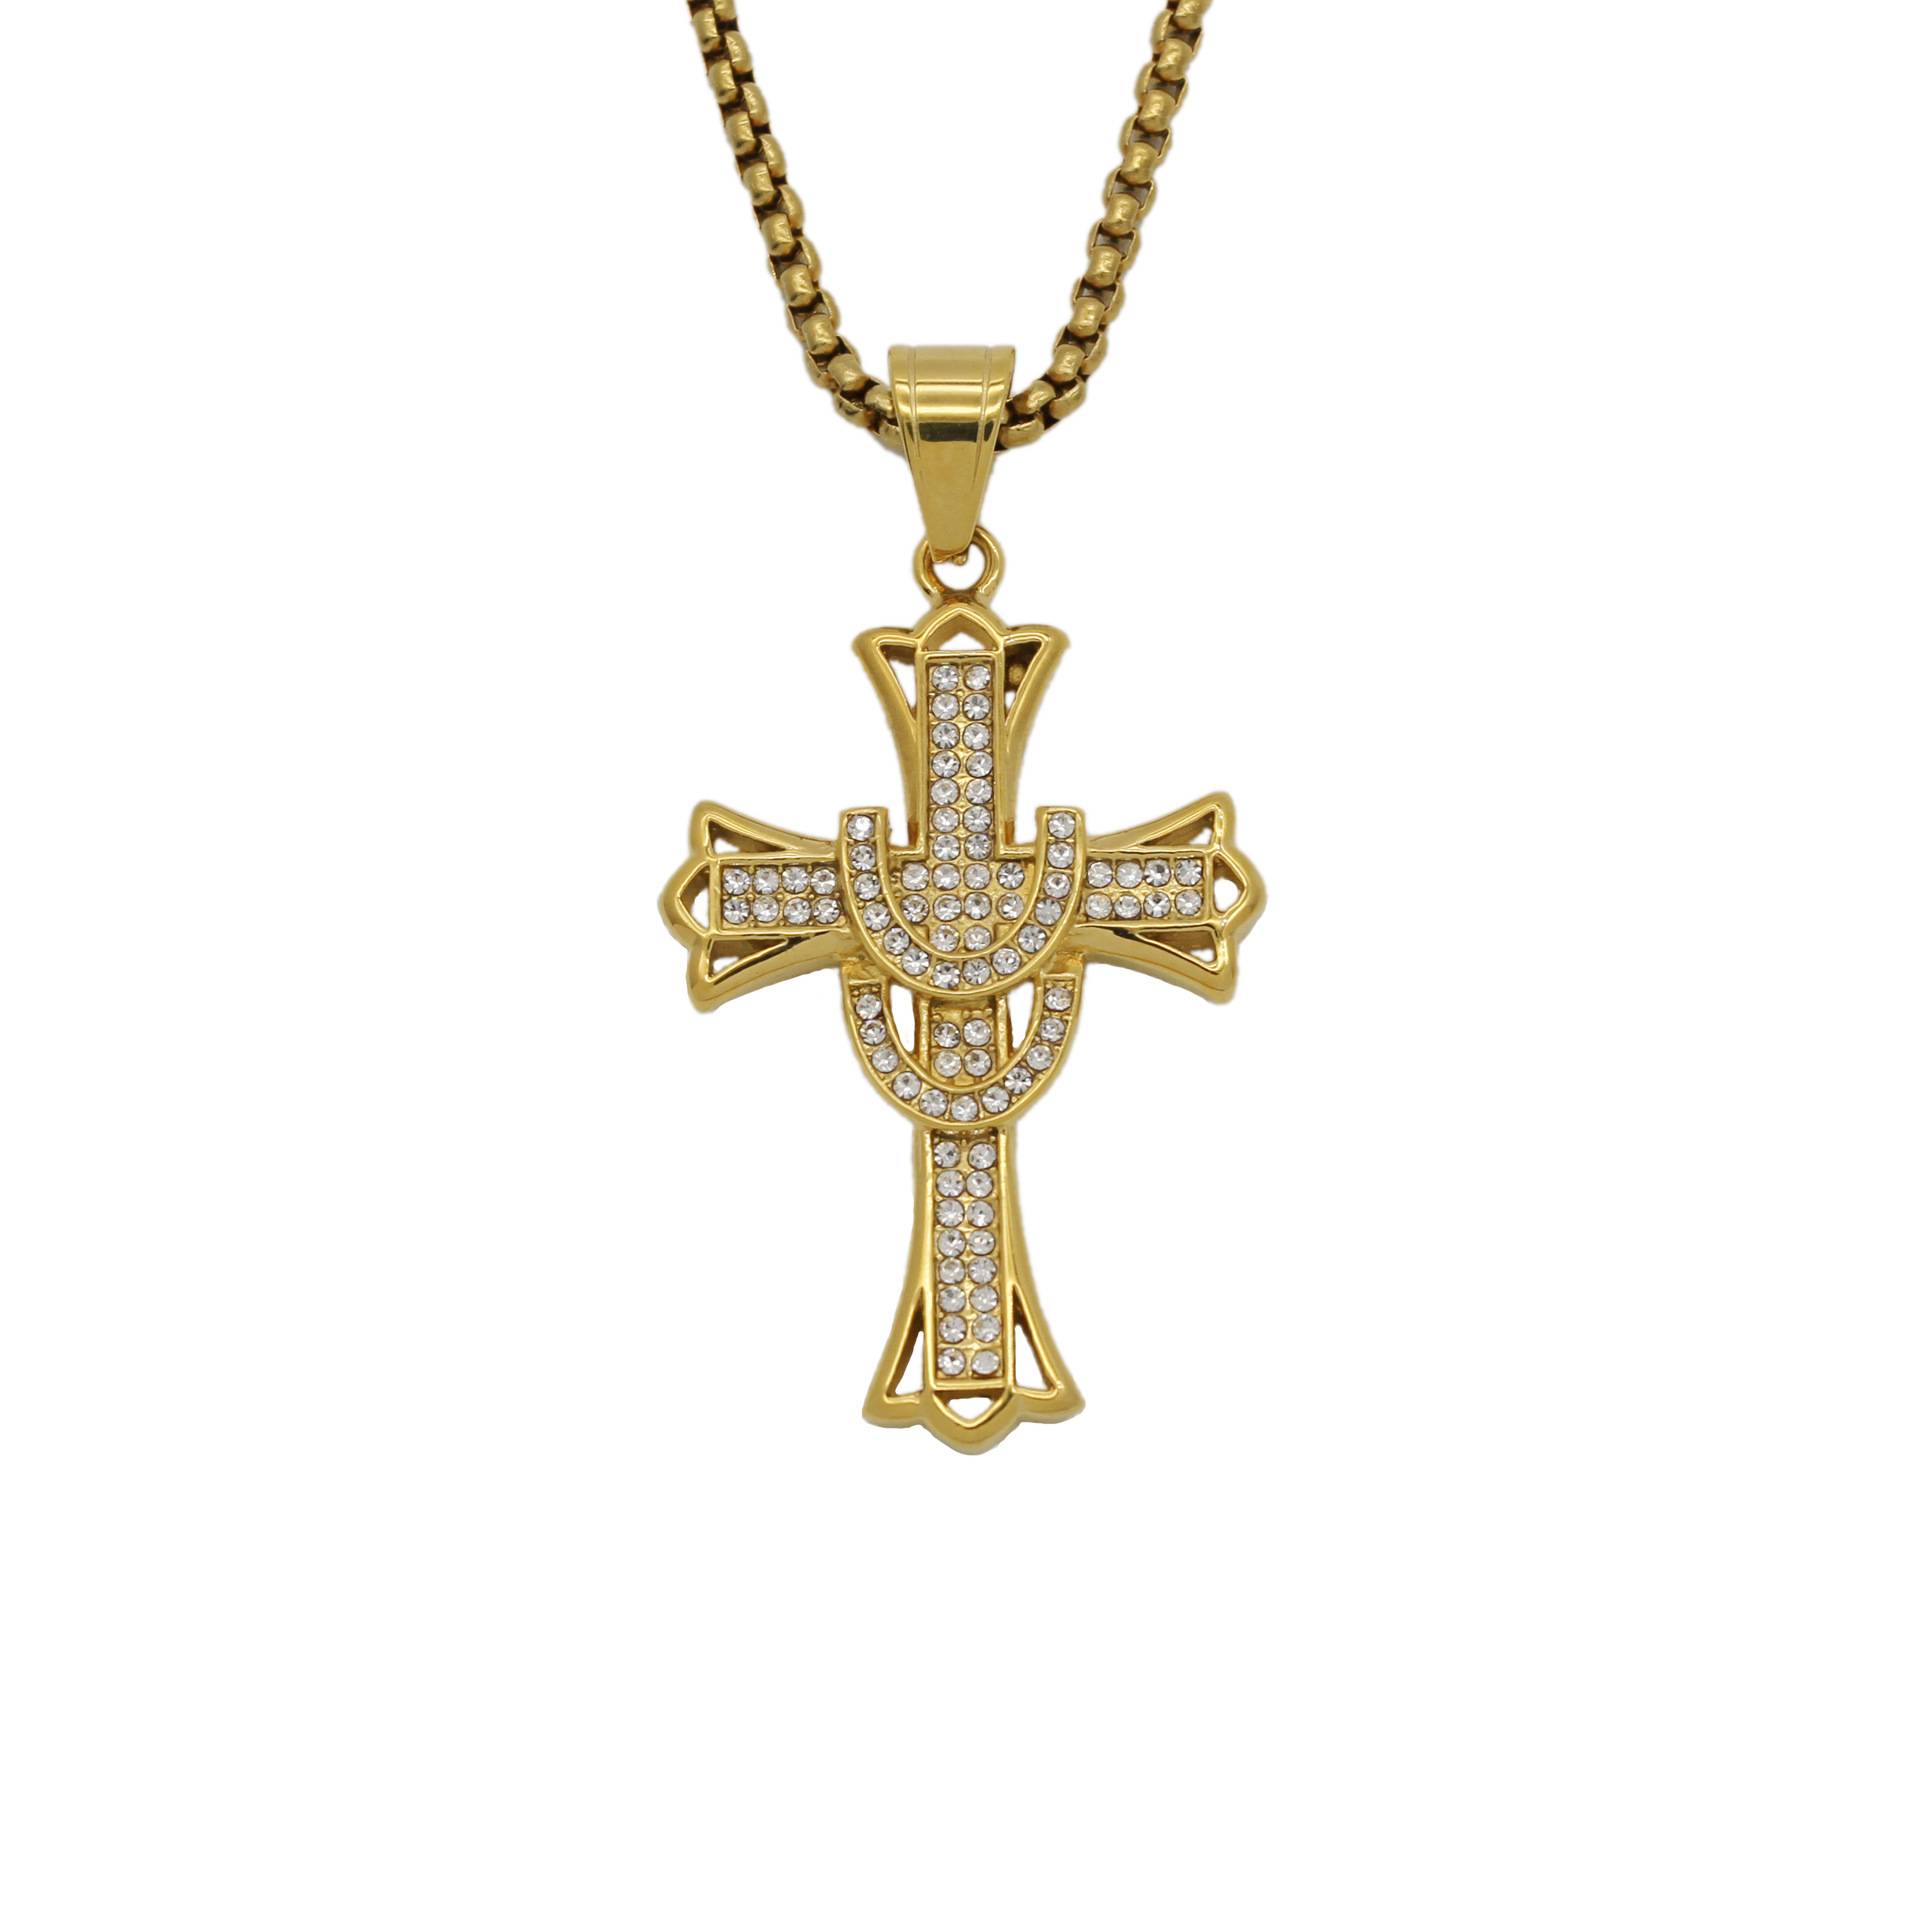 Iced Out Cross Crystal Pendant Stainless Steel Gold Plated Charm Necklace Hip Hop Christian Jesus Cross Pendant Necklace Jewelry